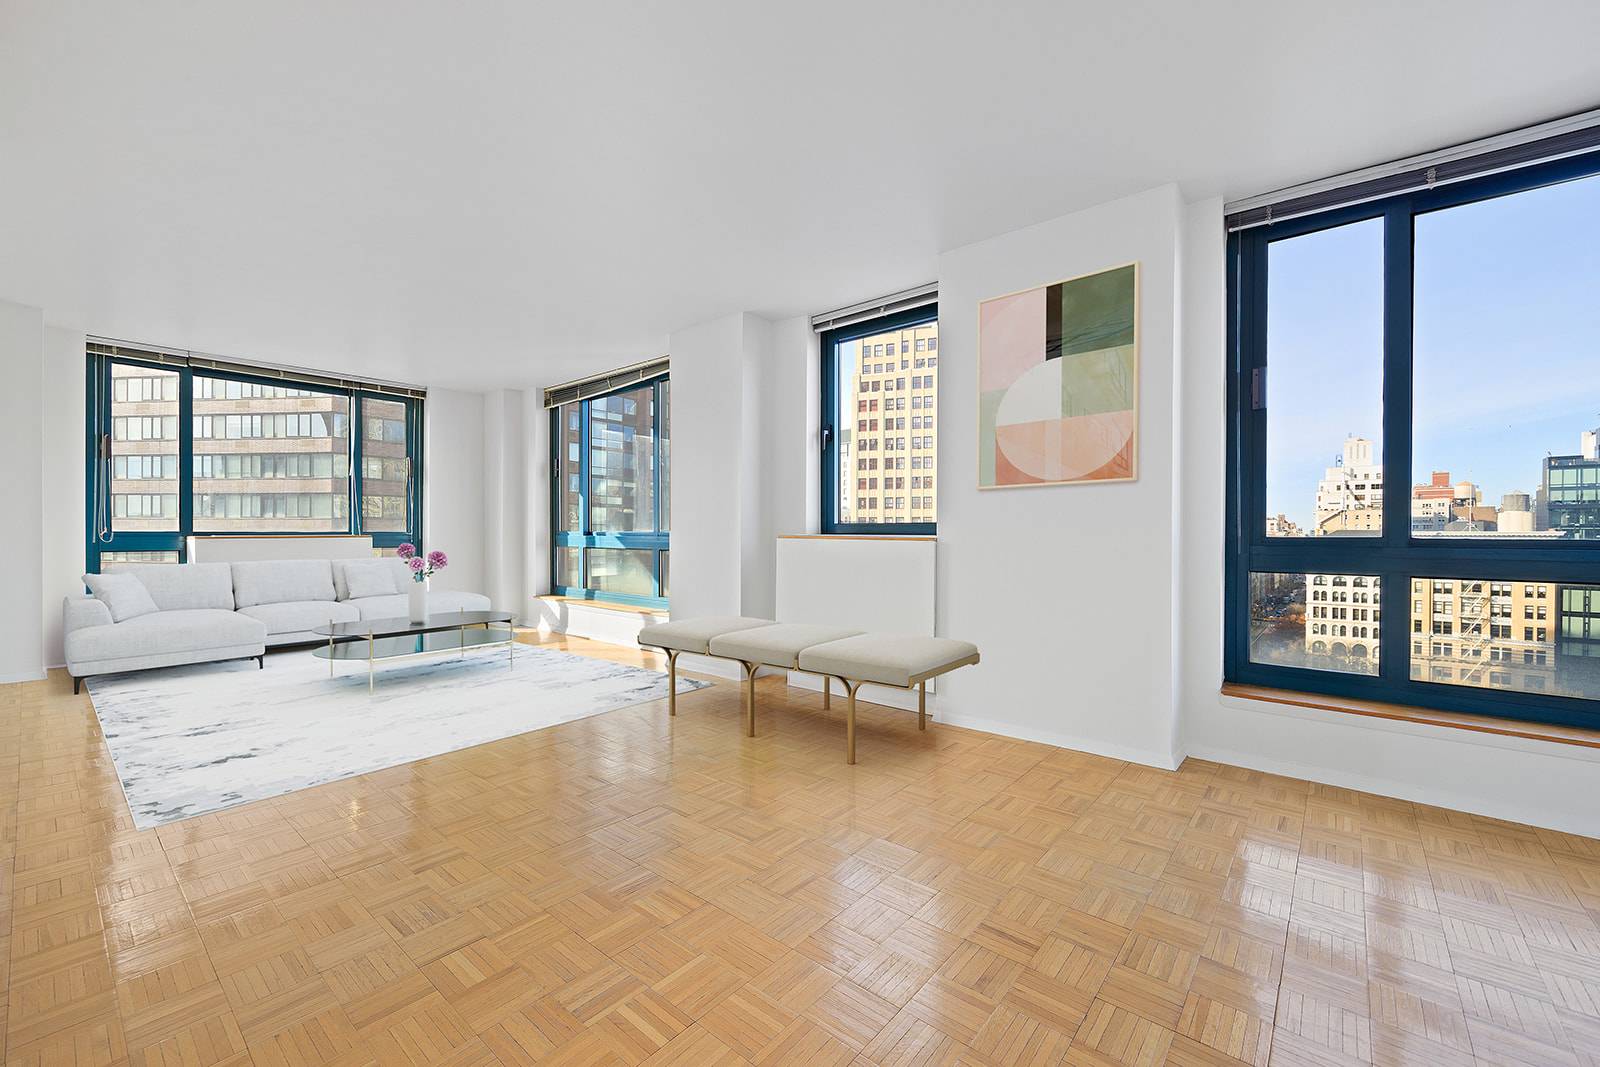 Convertible 2, Located on the 12th floor, this corner unit is the largest One Bedroom in the building.